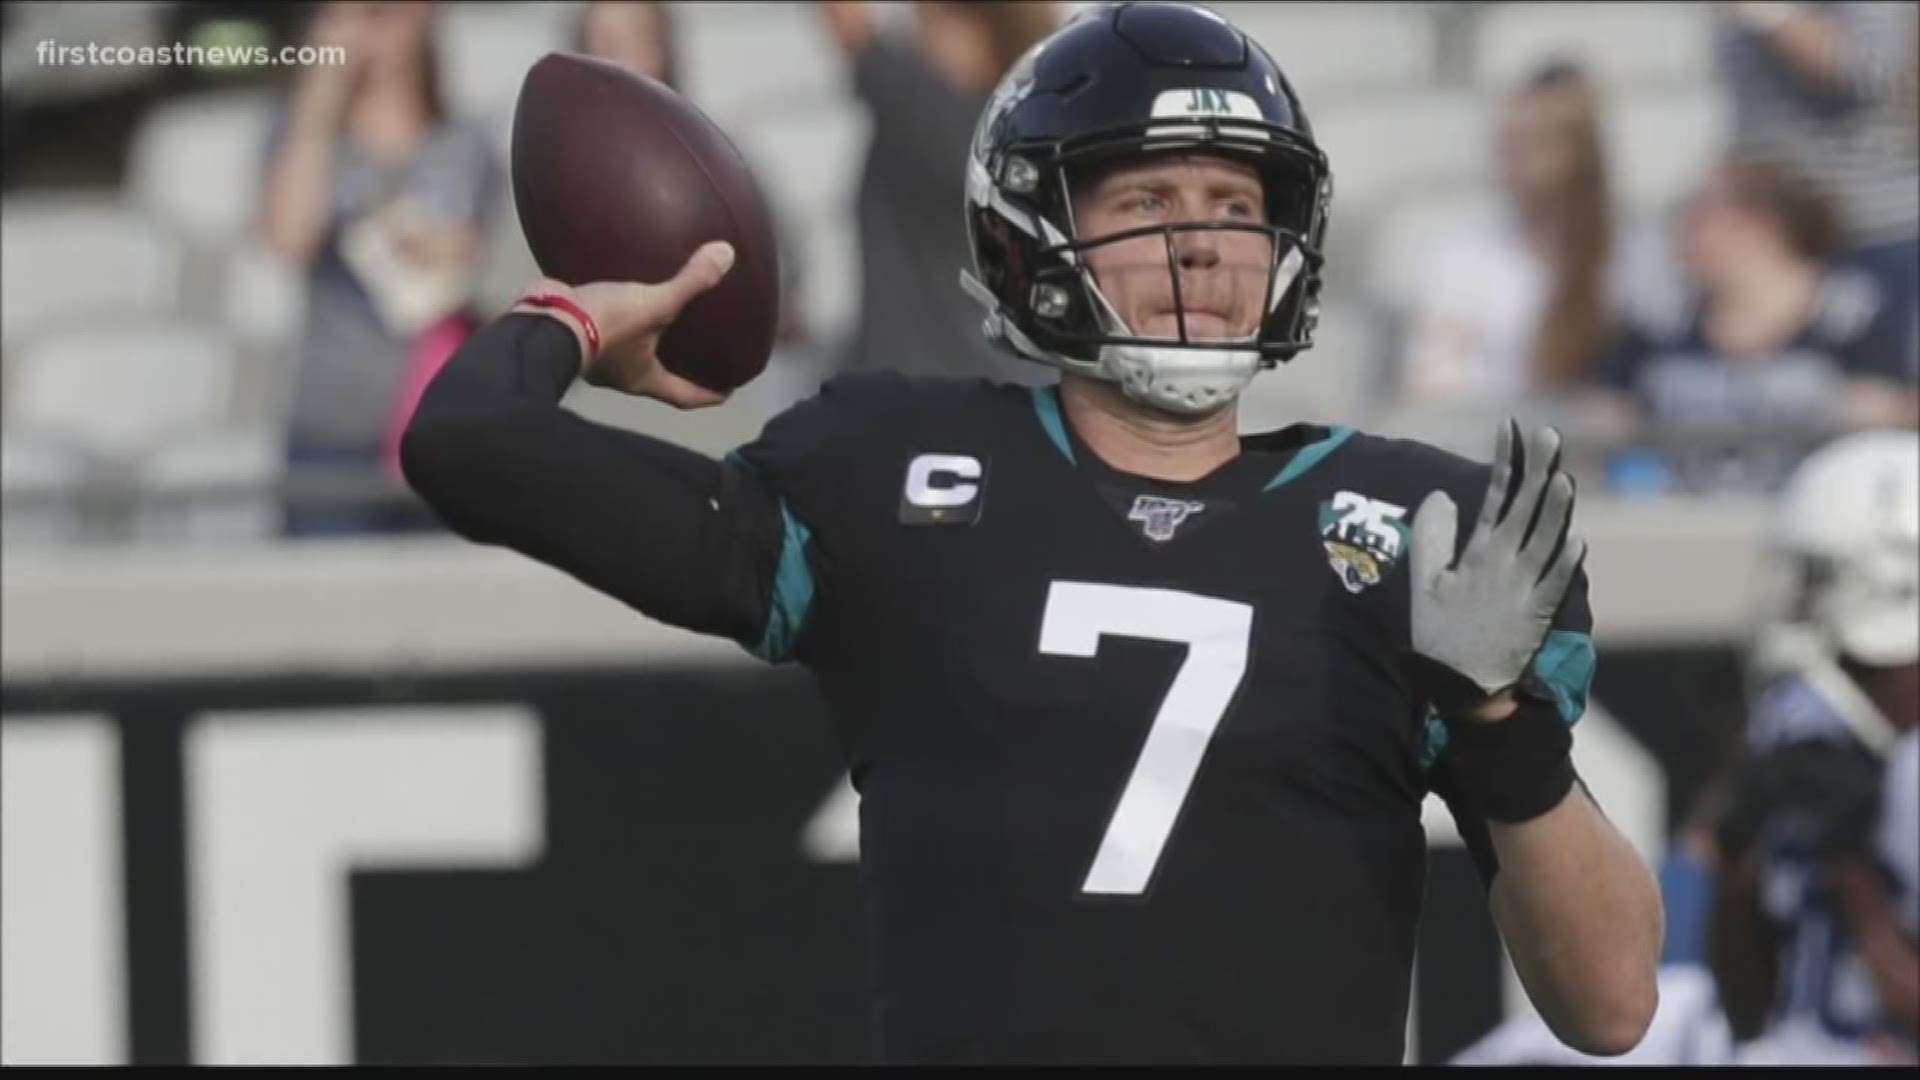 The Jaguars have reportedly traded quarterback Nick Foles to the Chicago Bears for a 2020 fourth-round draft selection.